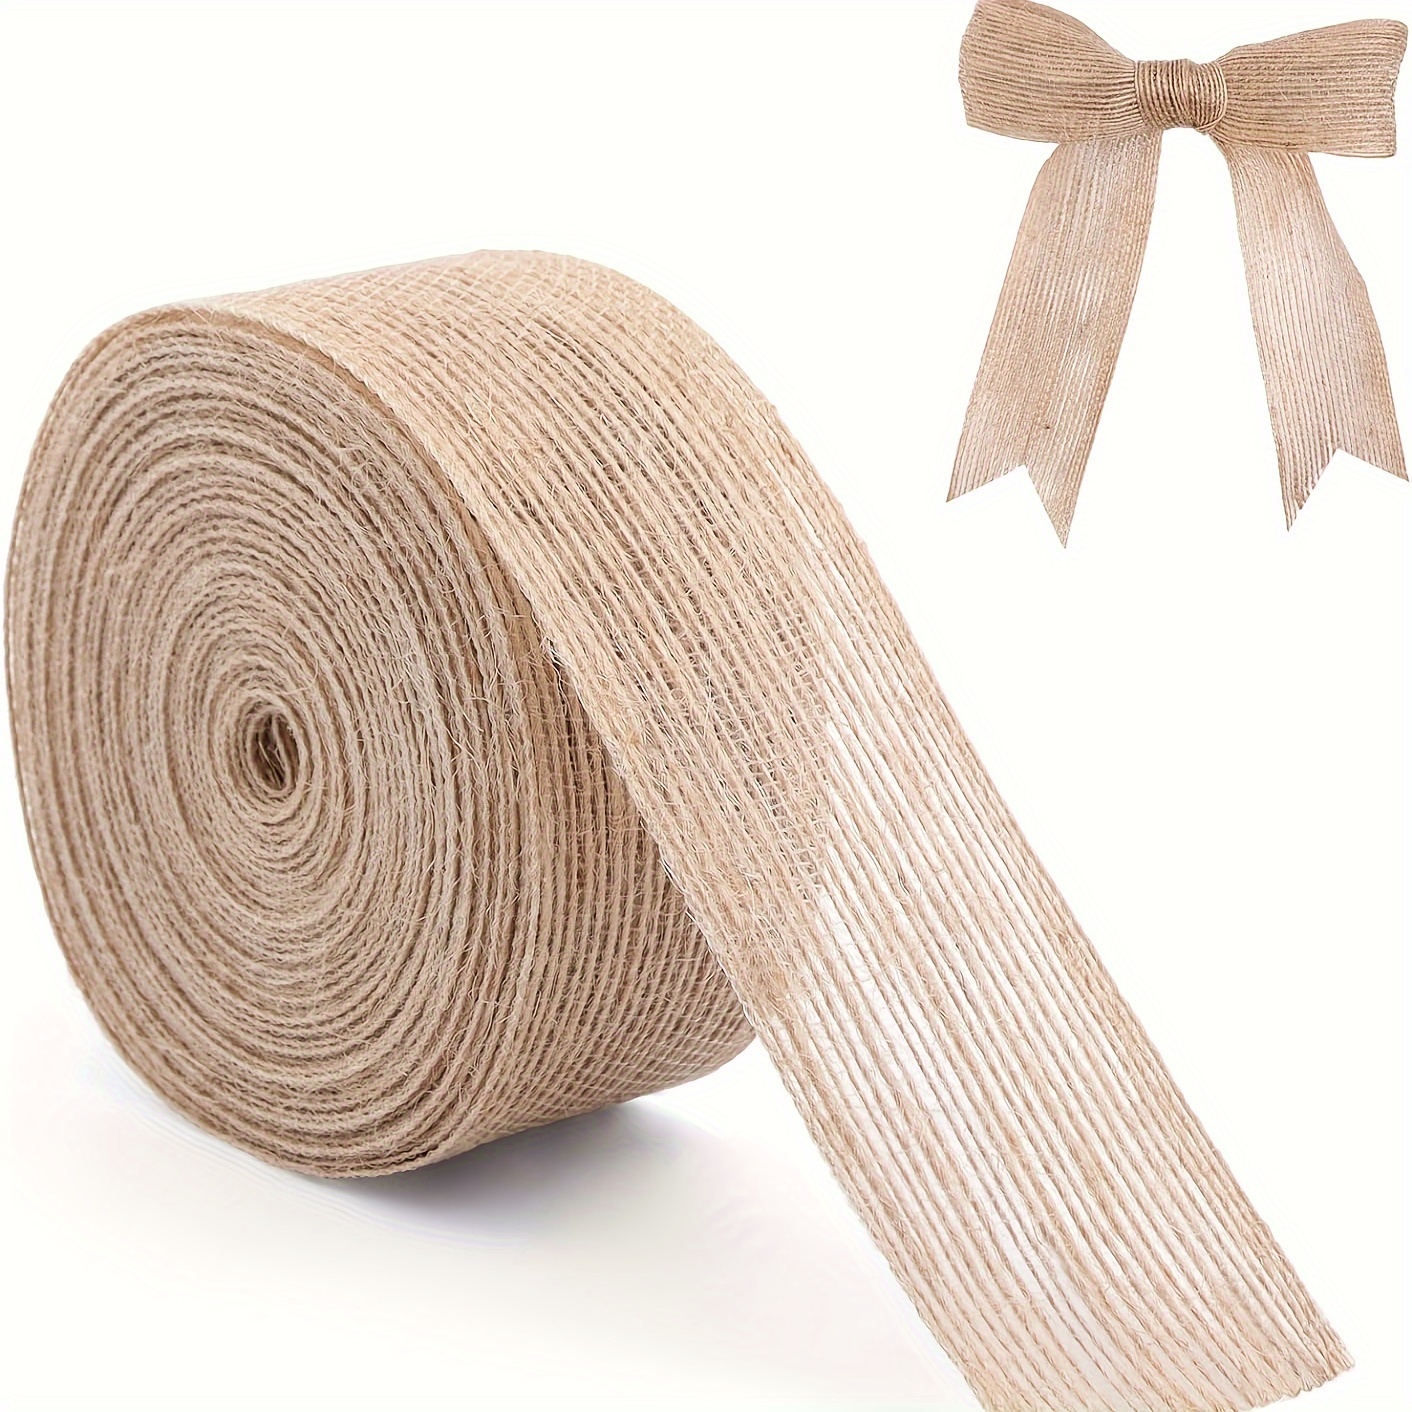 

Natural Burlap Ribbon Roll - 5cm Wide X 10m Length - Rustic Linen Jute Ribbon For Diy Crafts, Party Decor, Bows, And Christmas Gift Wrapping